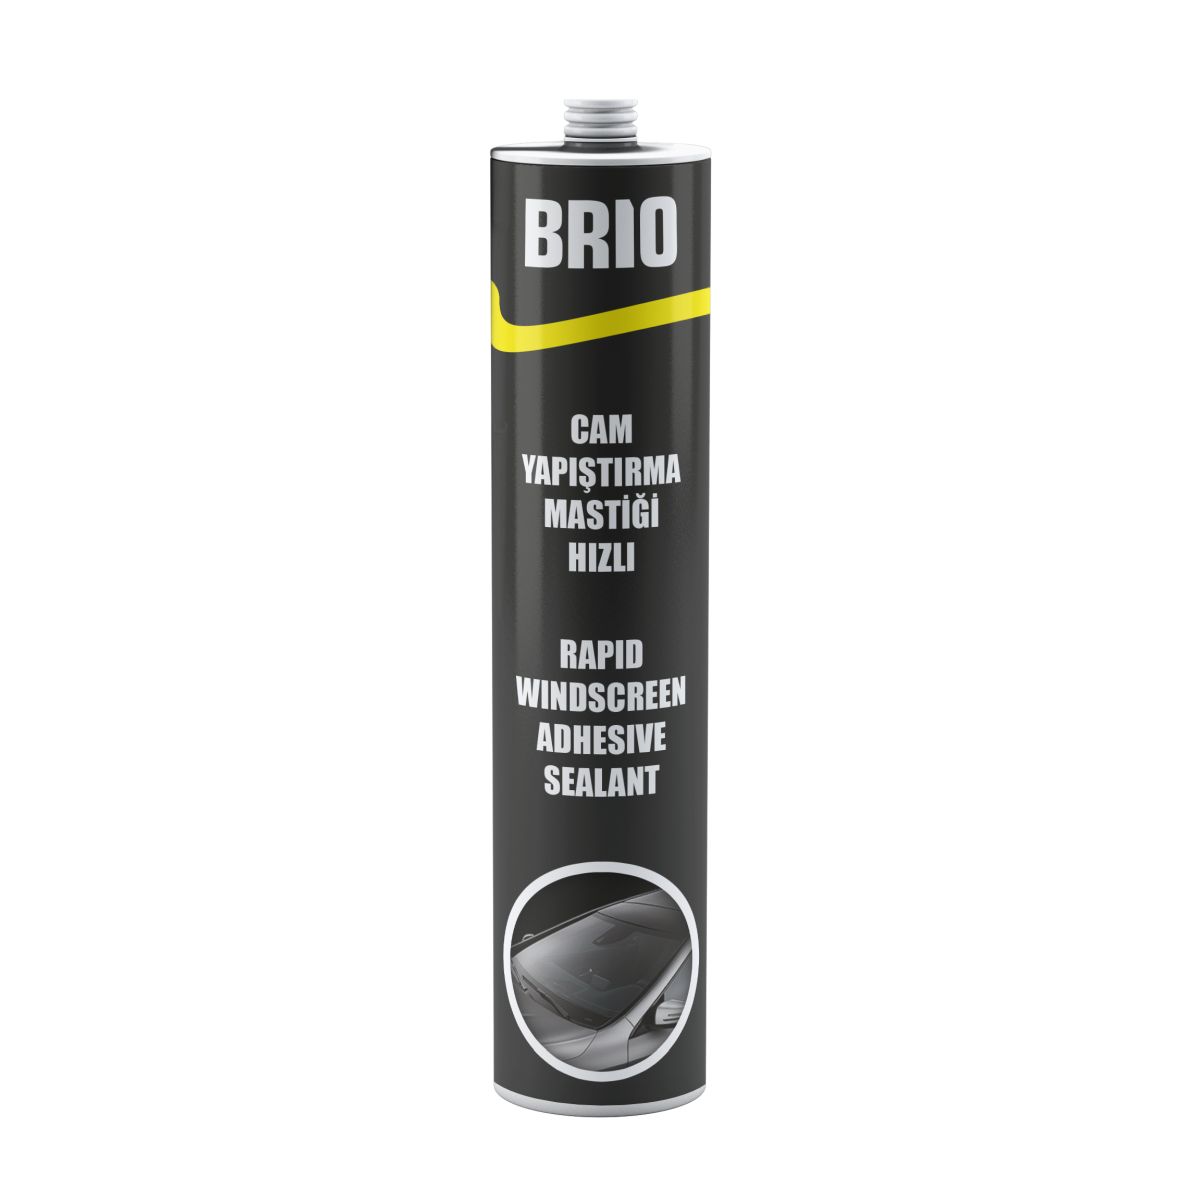 Quick%20Windscreen%20Adhesive%20And%20Sealant%20Rapid%20310%20Ml